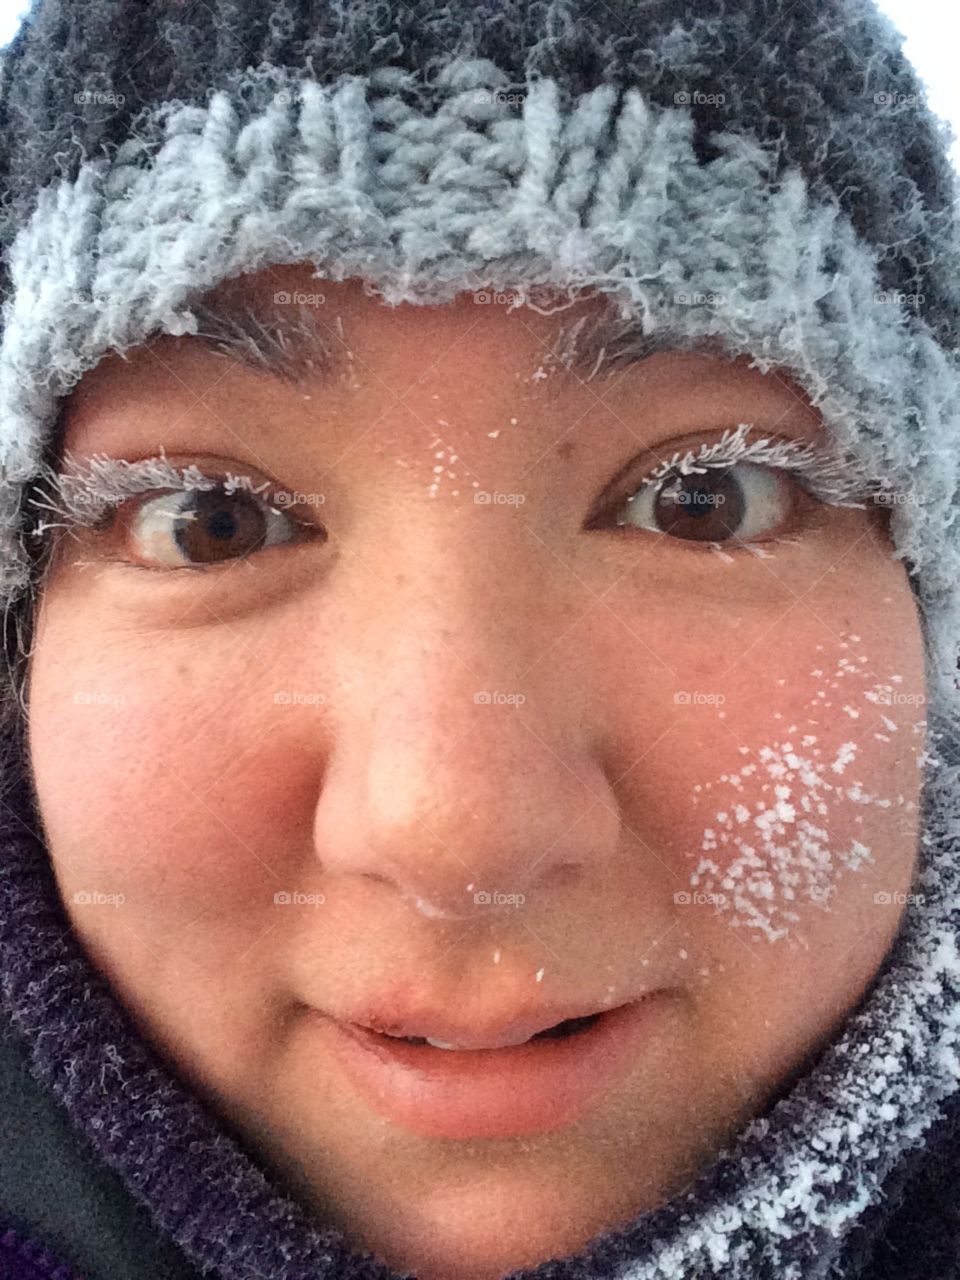 Lady with frozen eye lashes. Close up face. 